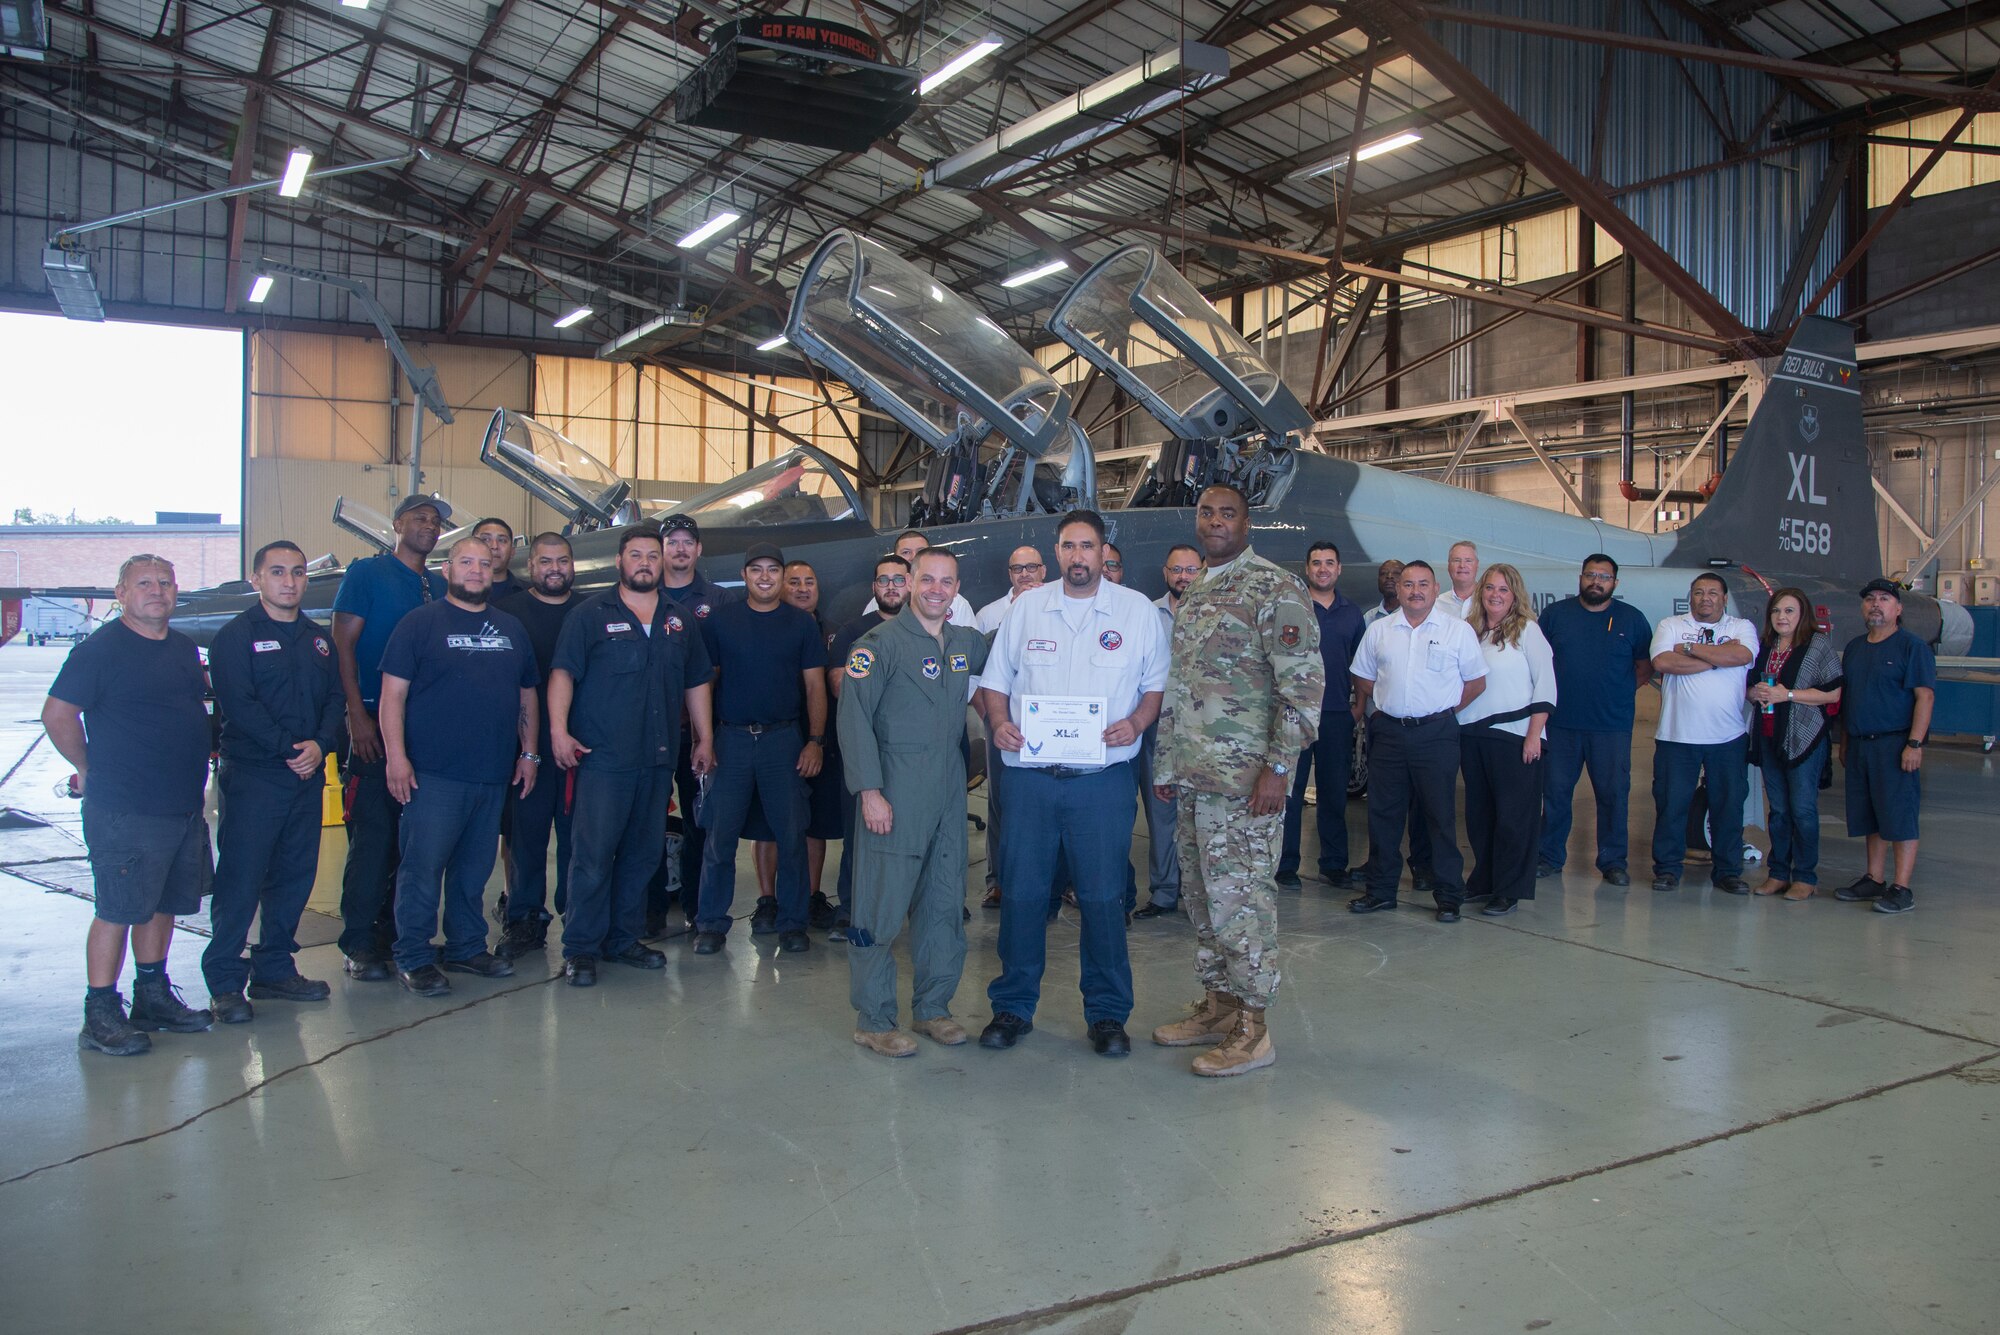 The 47th Maintenance Directorate T-38 Talon II division poses for a picture at Laughlin Air Force Base, Texas, Oct. 3, 2019. Daniel Soto, a 47th Maintenance Directorate aircraft maintenance supervisor was chosen by wing leadership to be the “XLer of the Week” of Sept. 30, 2019. (U.S. Air Force photo by Senior Airman Daniel Hambor)